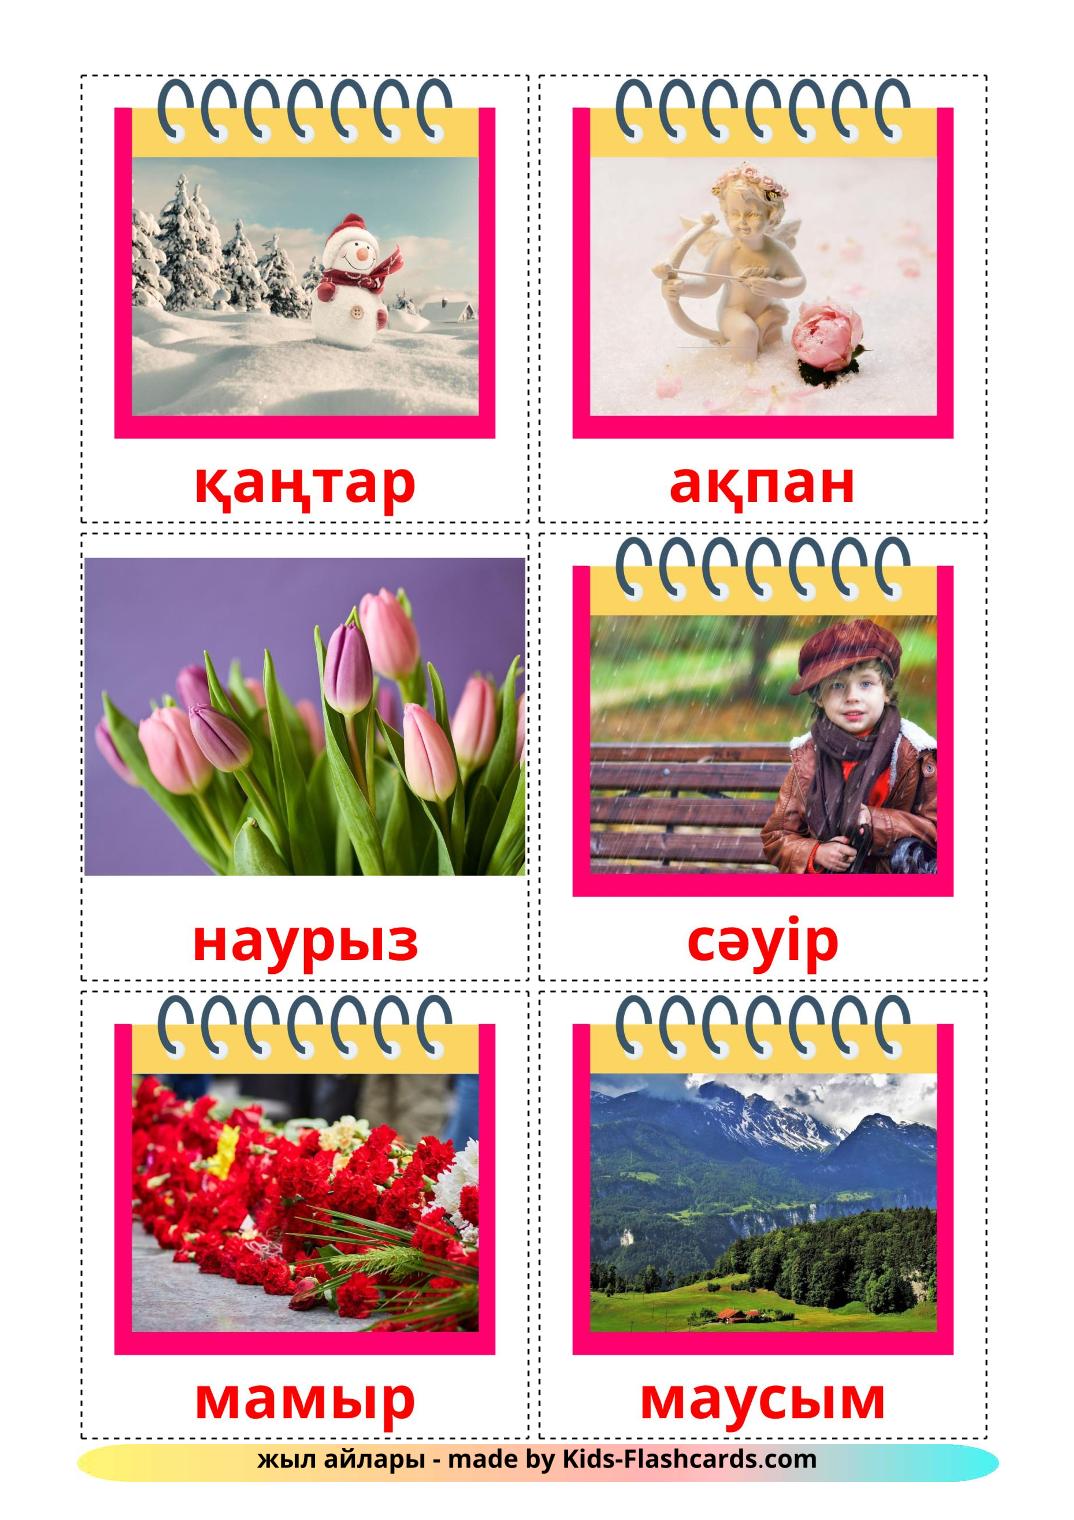 Months of the Year - 12 Free Printable kazakh Flashcards 